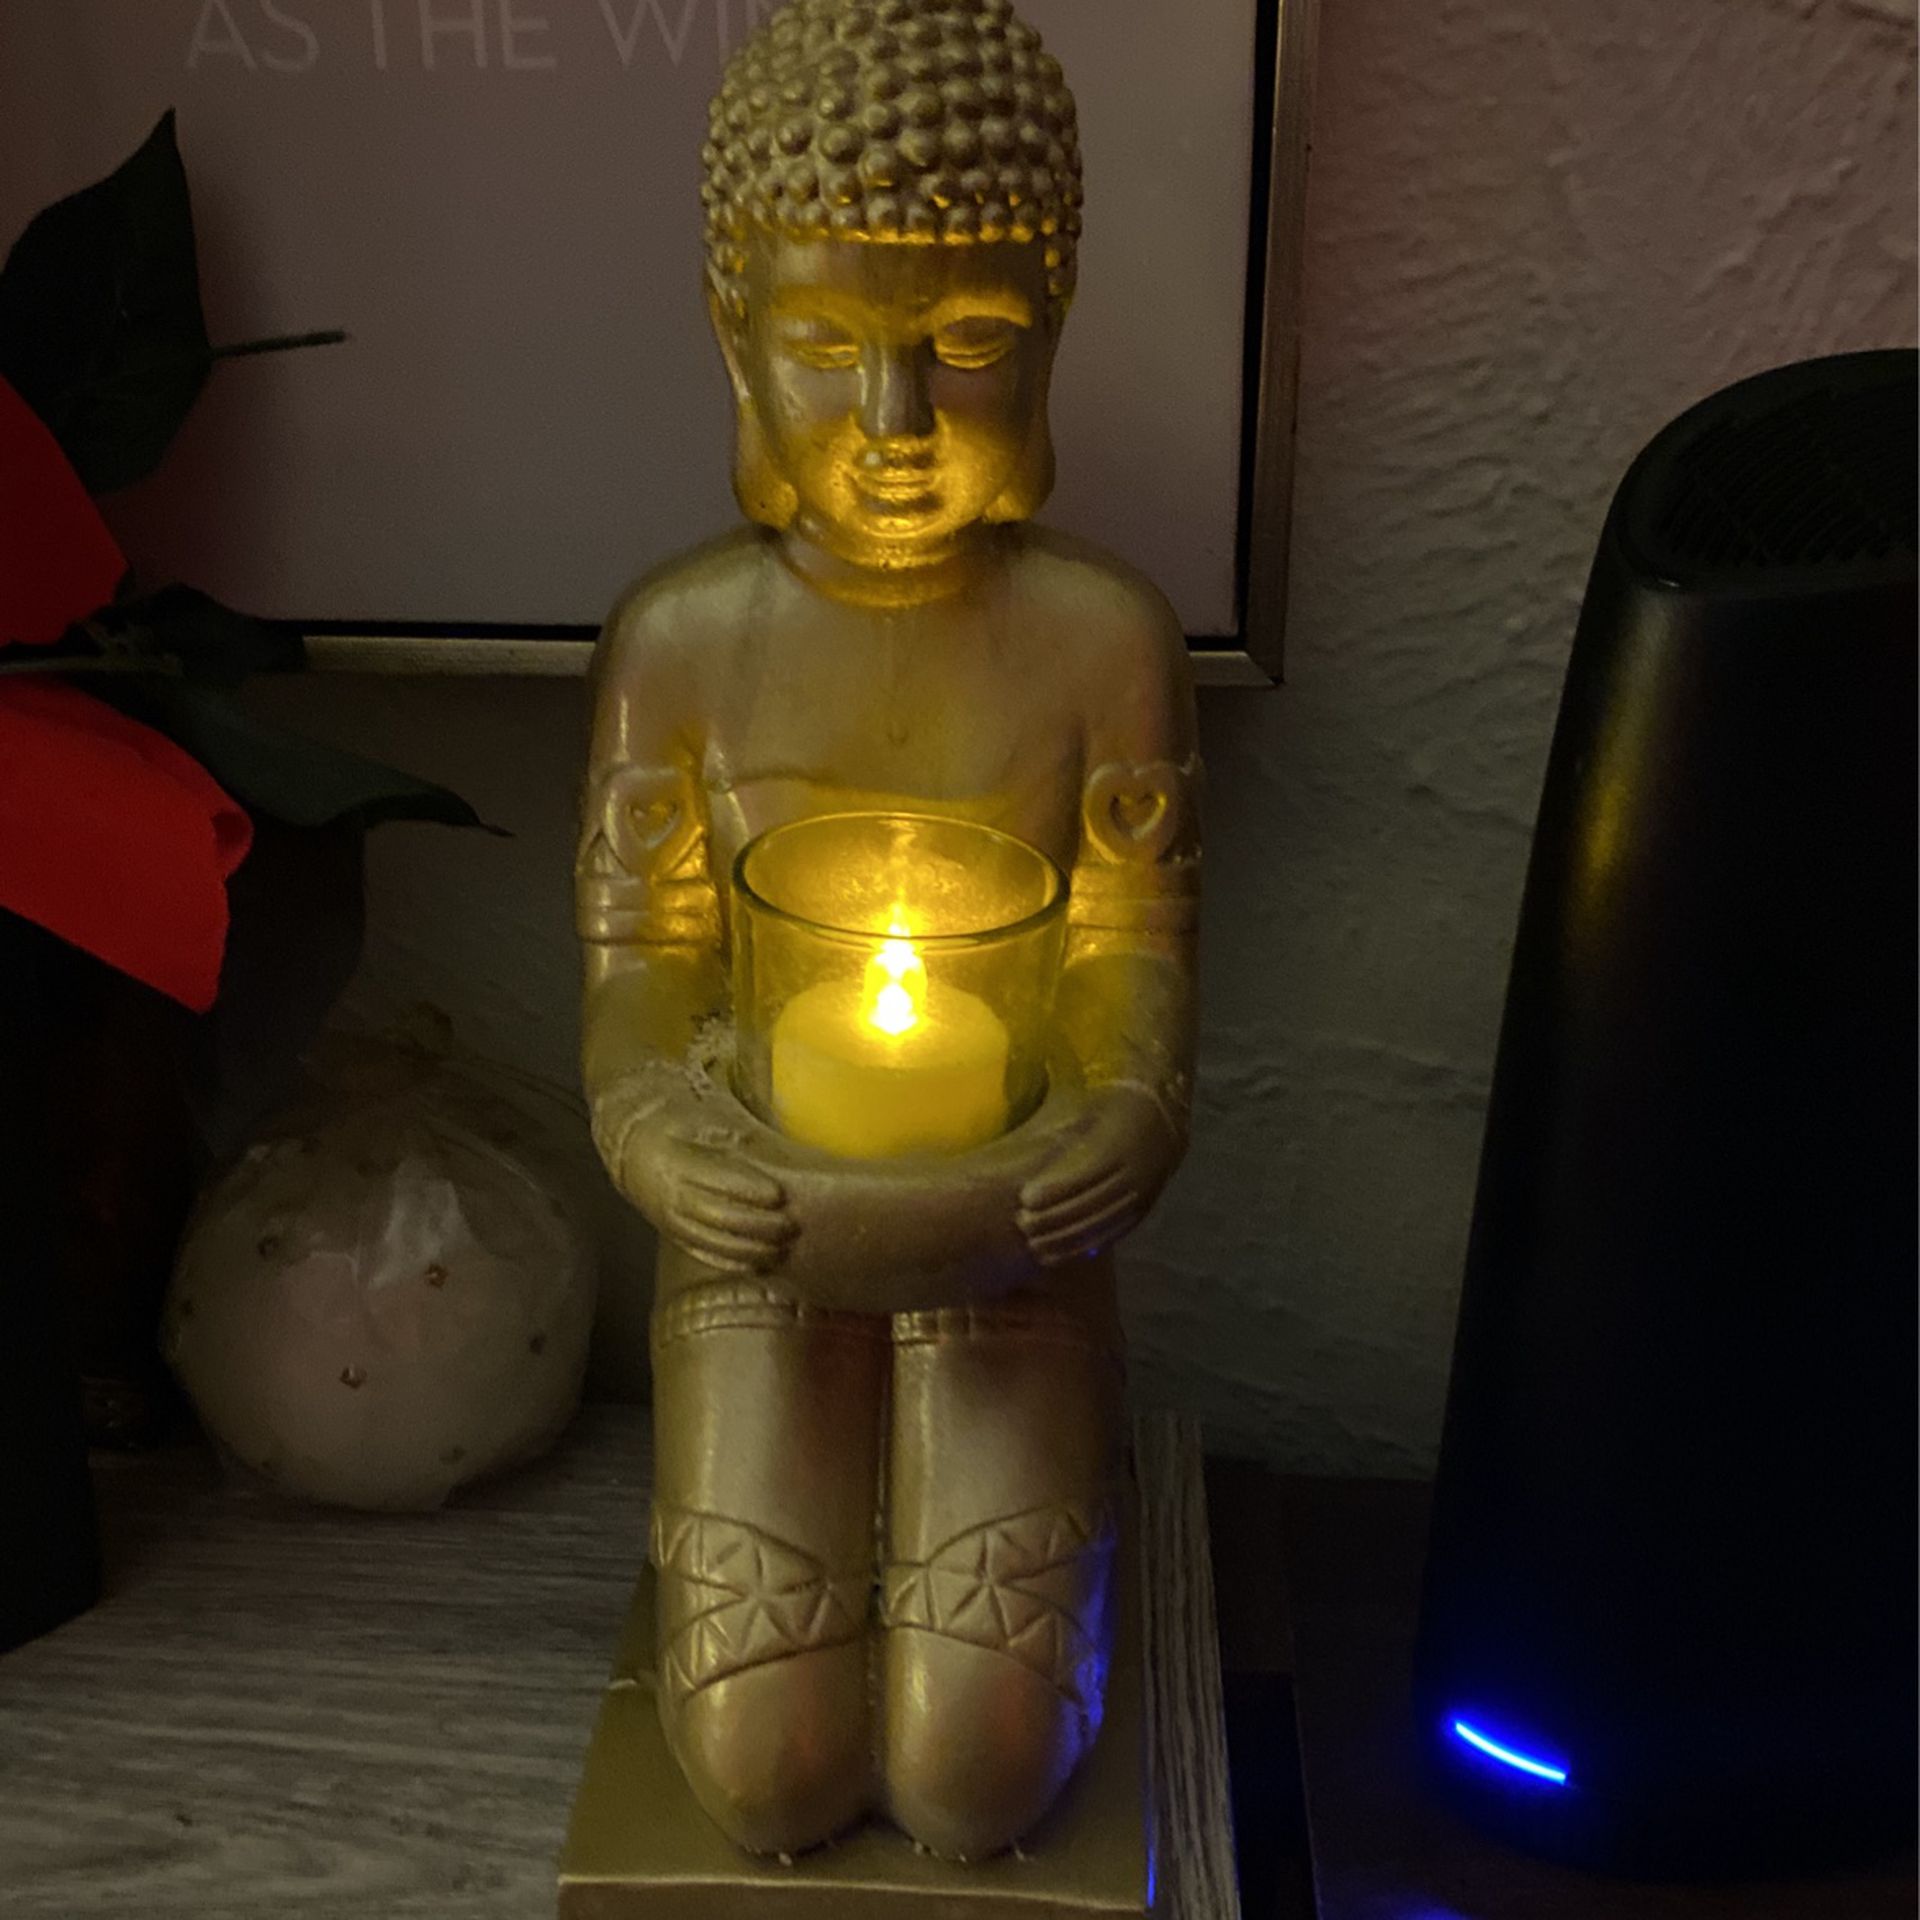 GOLDEN BUDDHA STATUE/Lighted Candle $20